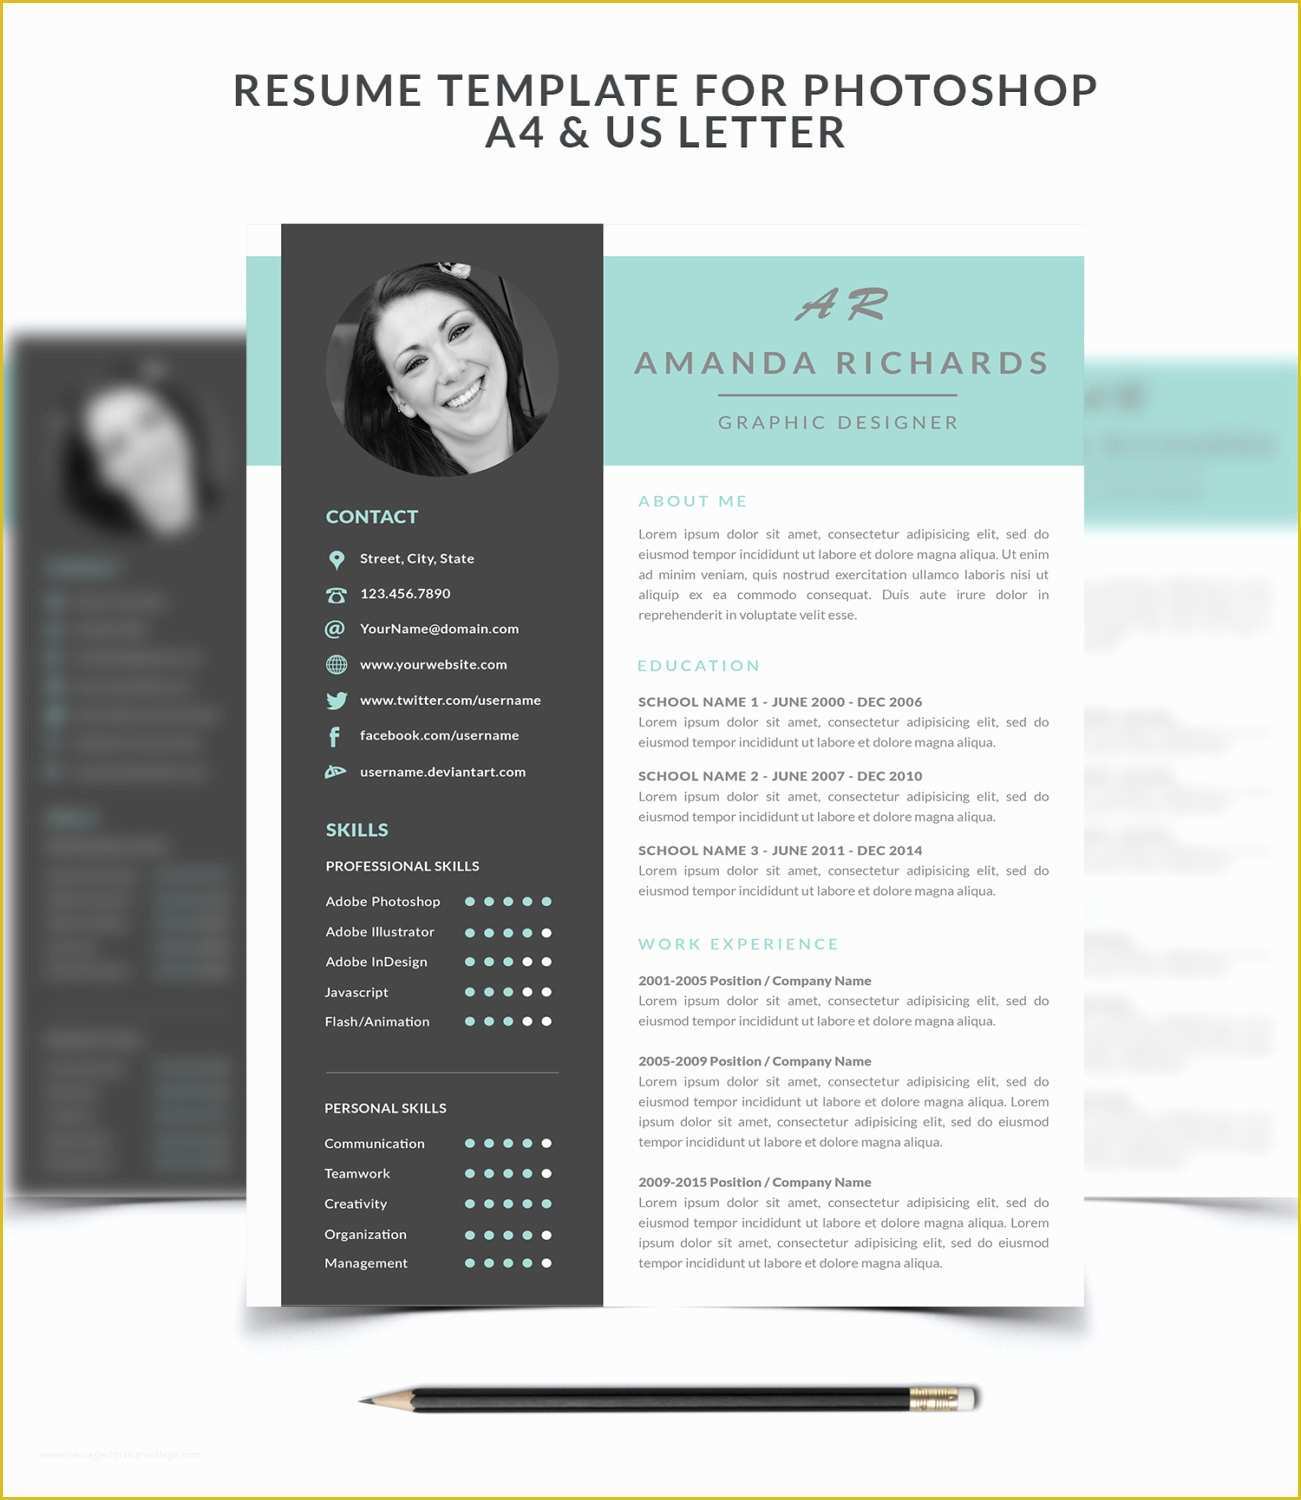 Photoshop Resume Template Free Of Resume Template 001 for Shop Cv Cover Letter